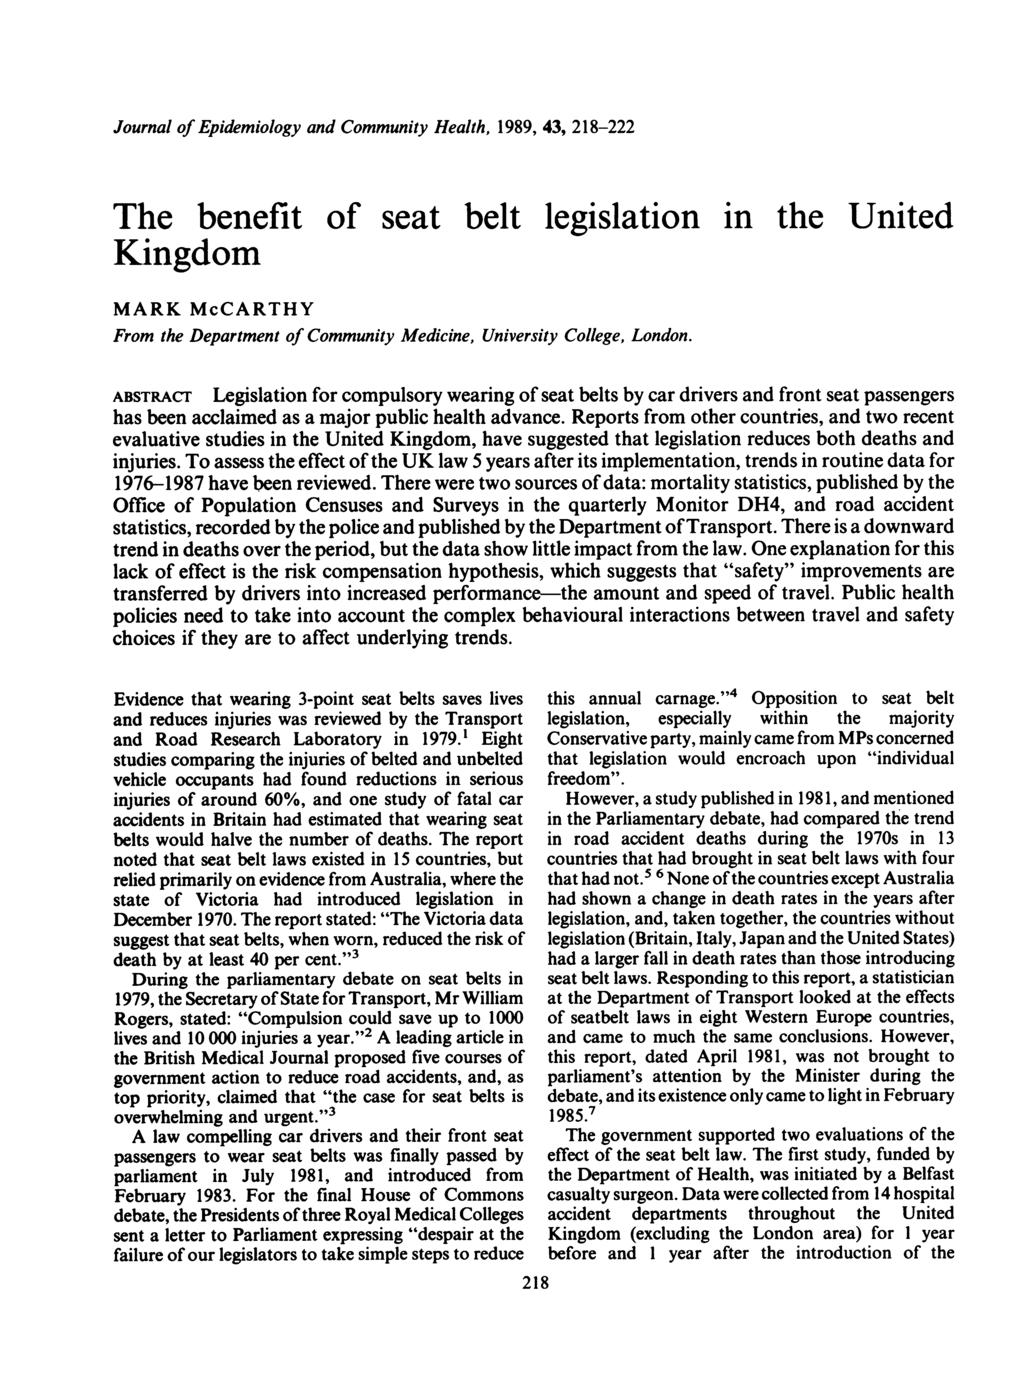 Journal of Epidemiology and Community Health, 1989, 43, 218-222 The benefit of Kingdom seat belt legislation in the United MARK McCARTHY From the Department of Community Medicine, University College,